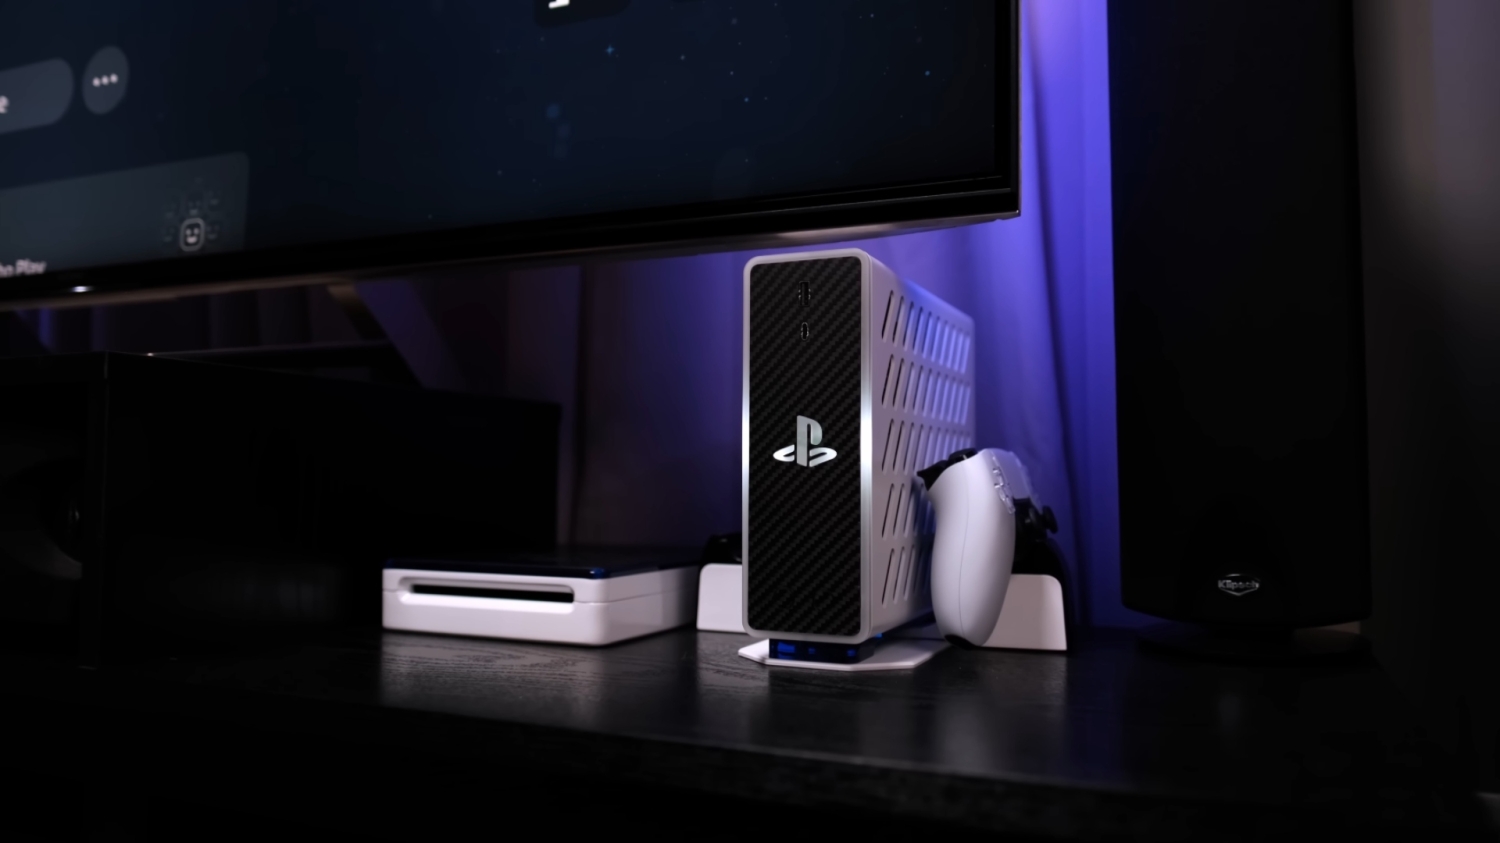 PlayStation 5 Slim model sounds much less clunky